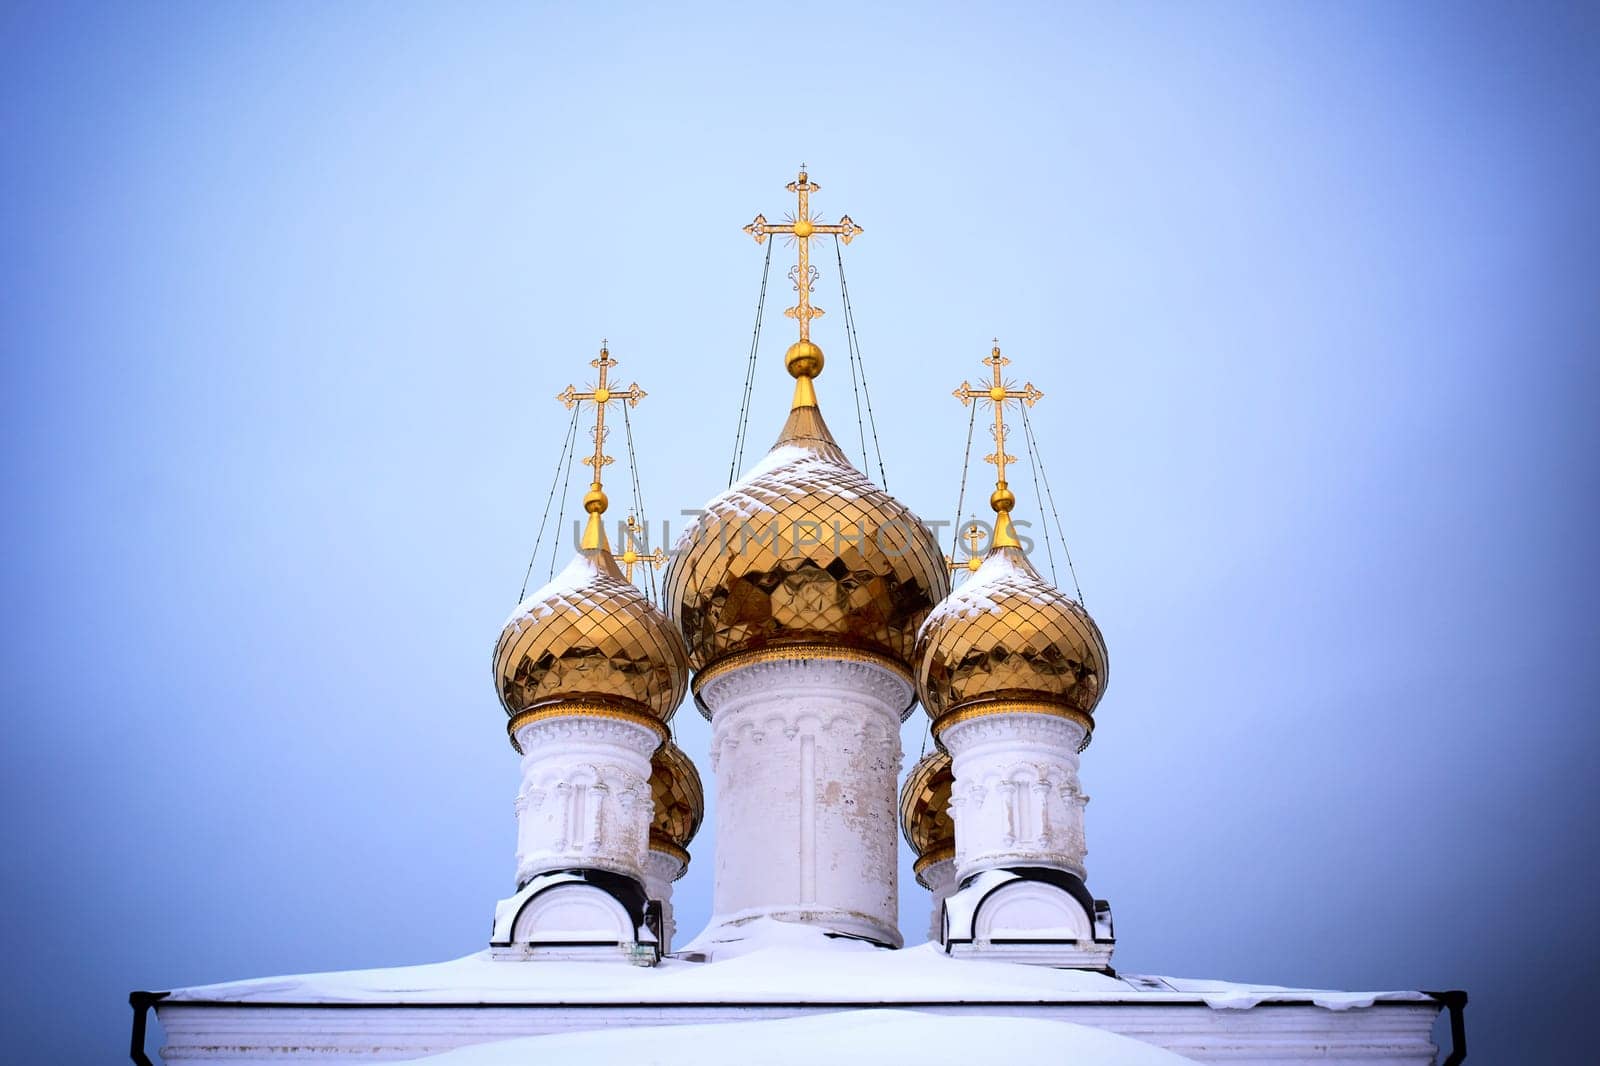 Orthodox church with golden domes and crosses in winter against the blue sky